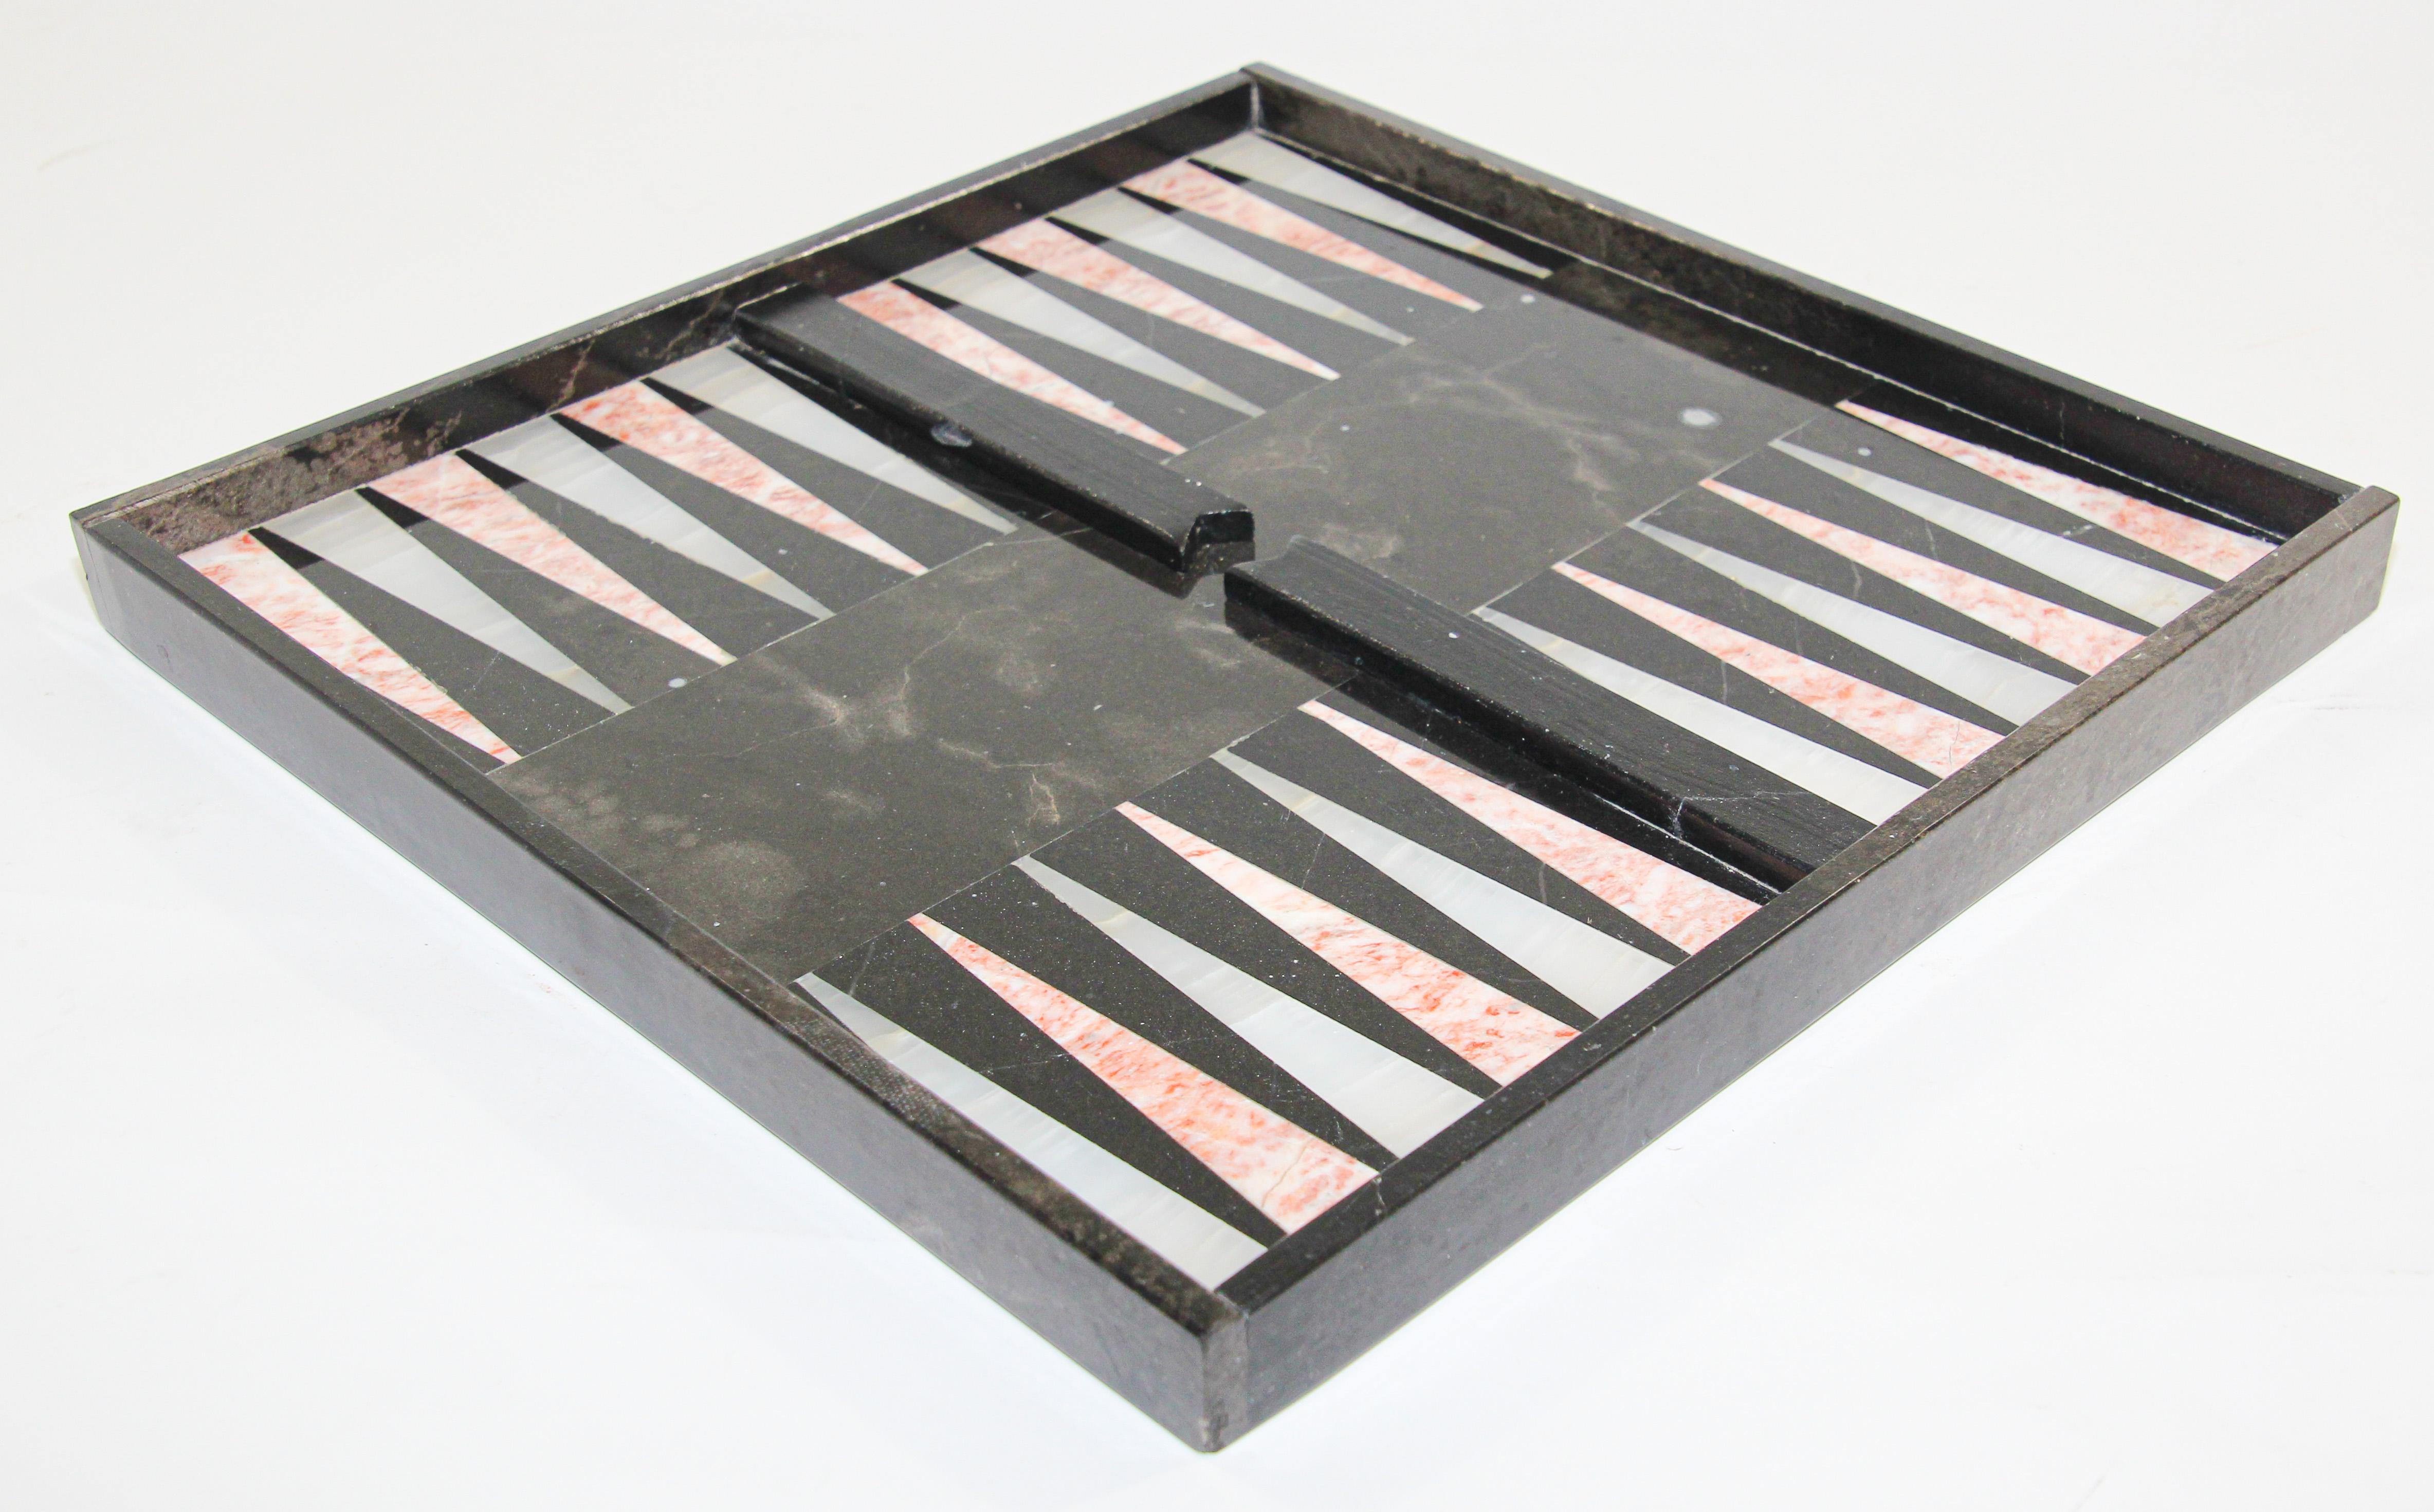 Italian marble backgammon and chess board game, 1960s
Play this beloved centuries old games in style!
An Italian vintage marble backgammon in one side and chess board in the other side
inlay with onyx.
Italy, circa 1960 gorgeous black, rose and